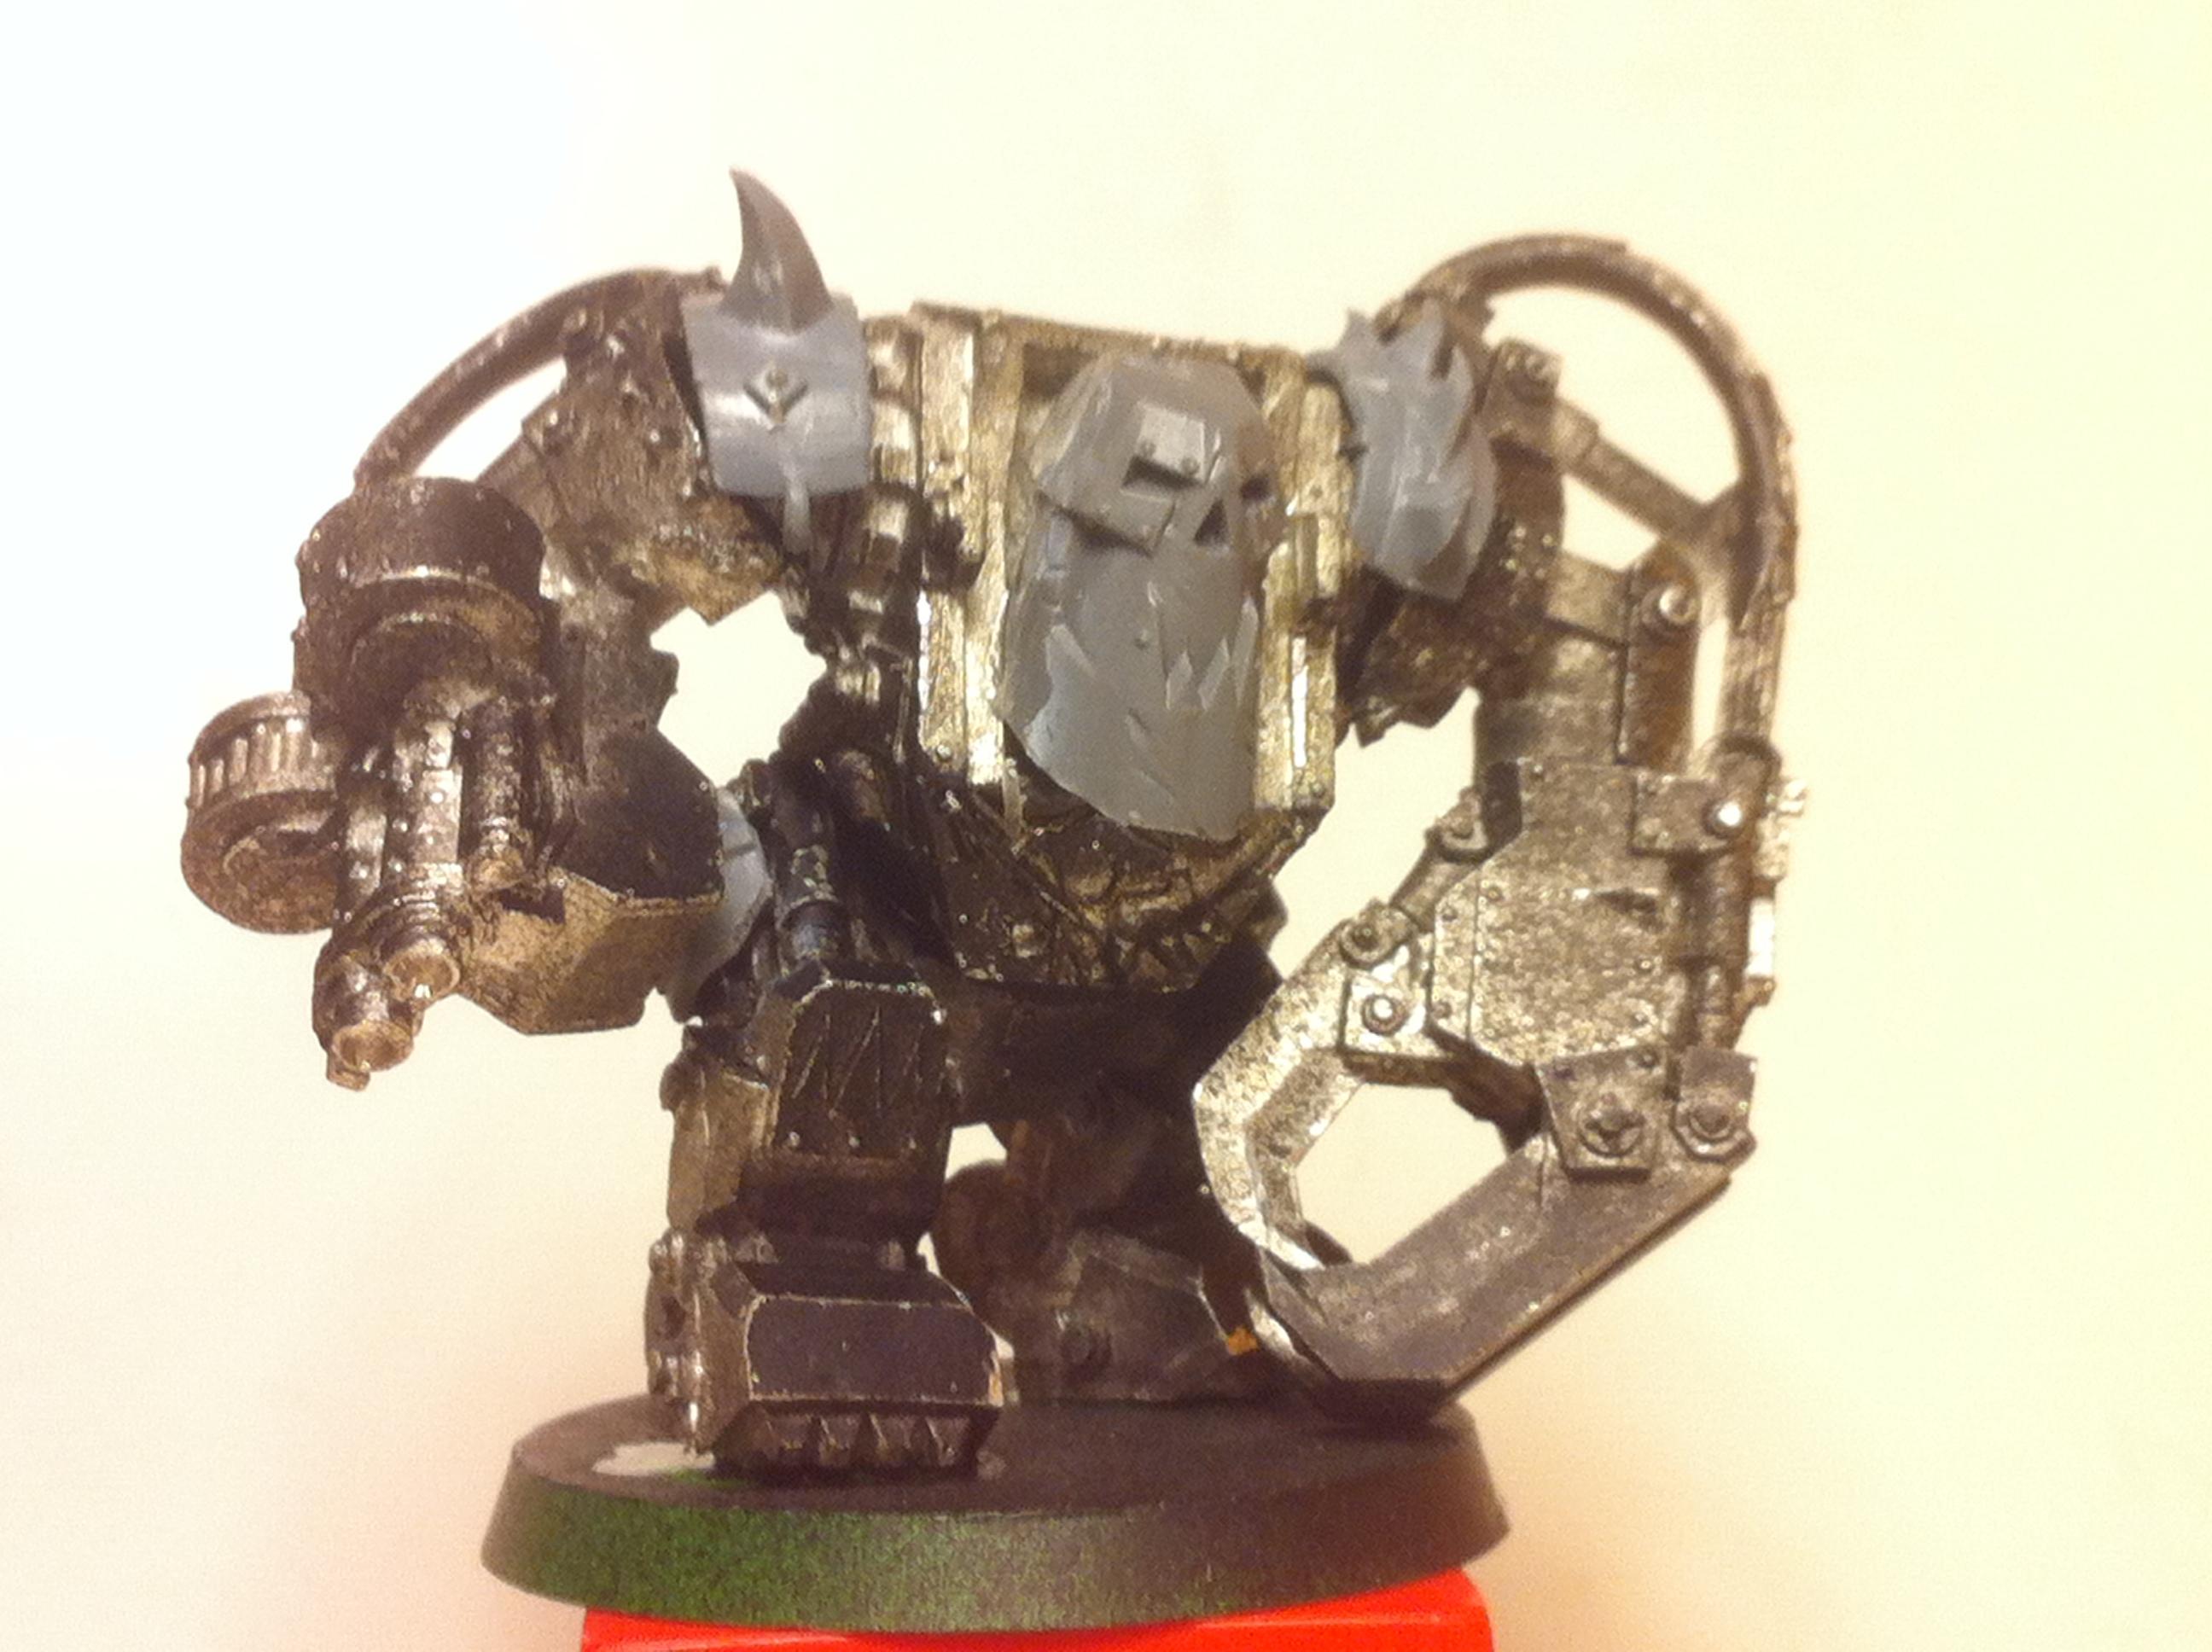 Boss, Conversion, Gigant, Hopper, Huge, Nob, Orks, Scratch Build, Squigg, Squigs, Waaagh